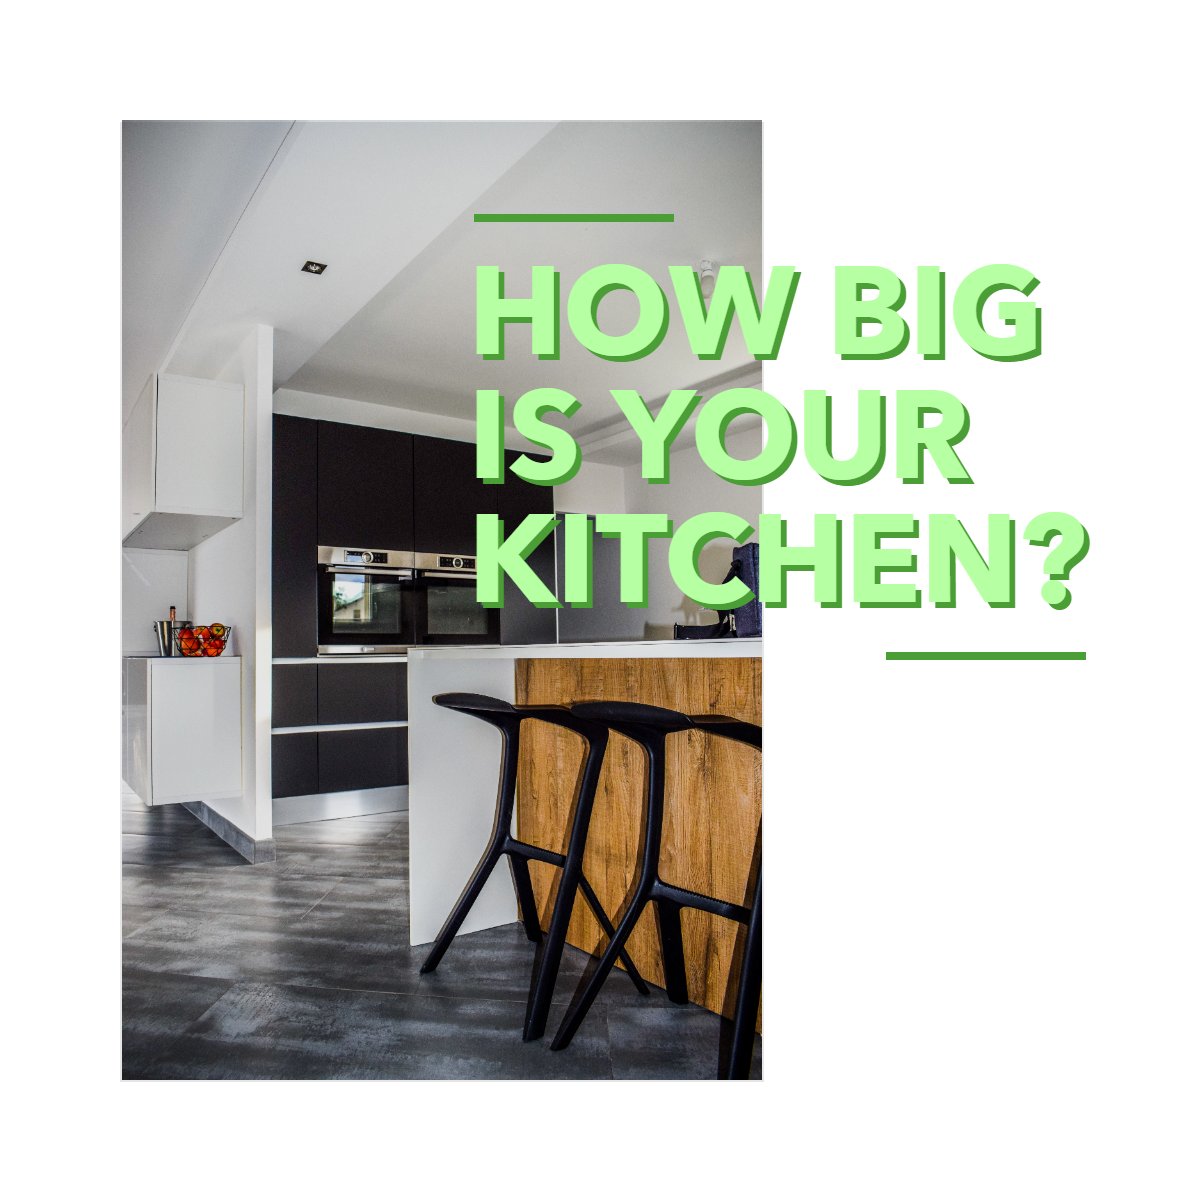 In the US, the average kitchen size for single homes is 161 square feet.

How big is your kitchen? 

#realestate #kitchensize #kitchen #homes
 #homesales